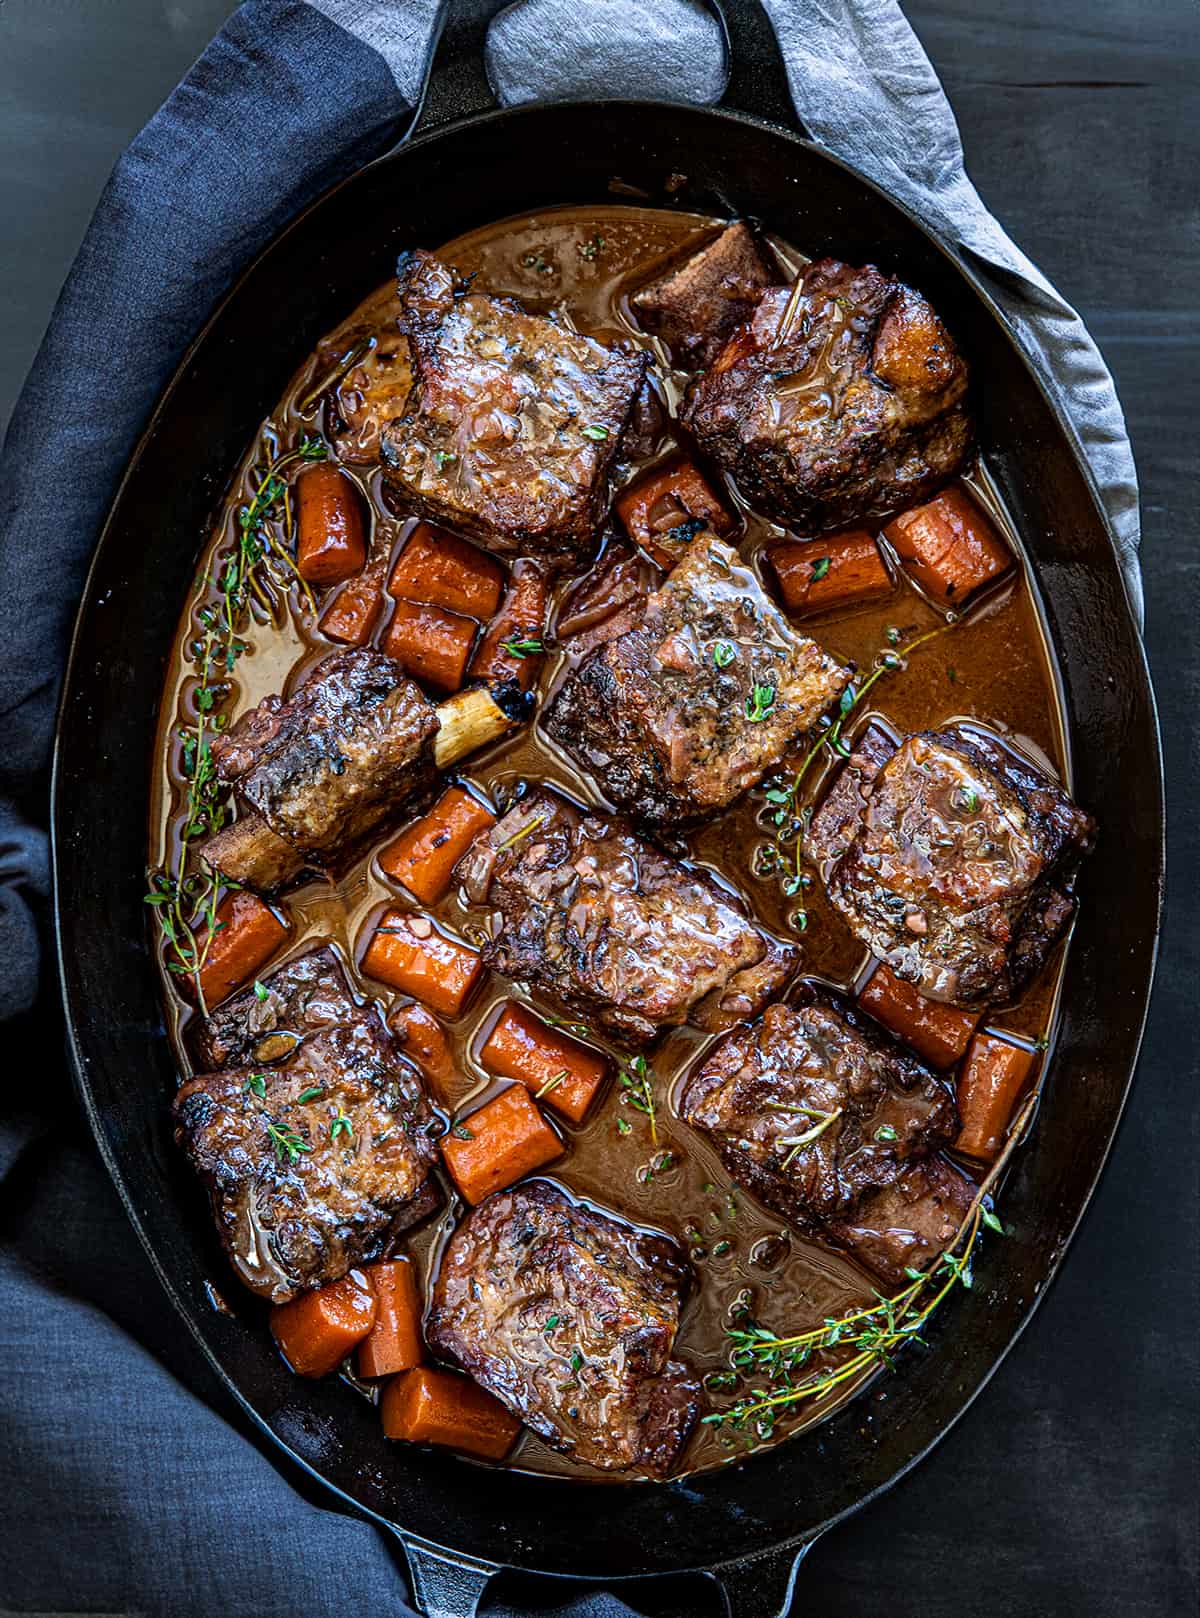 Pan of Wine Braised Short Ribs on a wooden table from overhead.